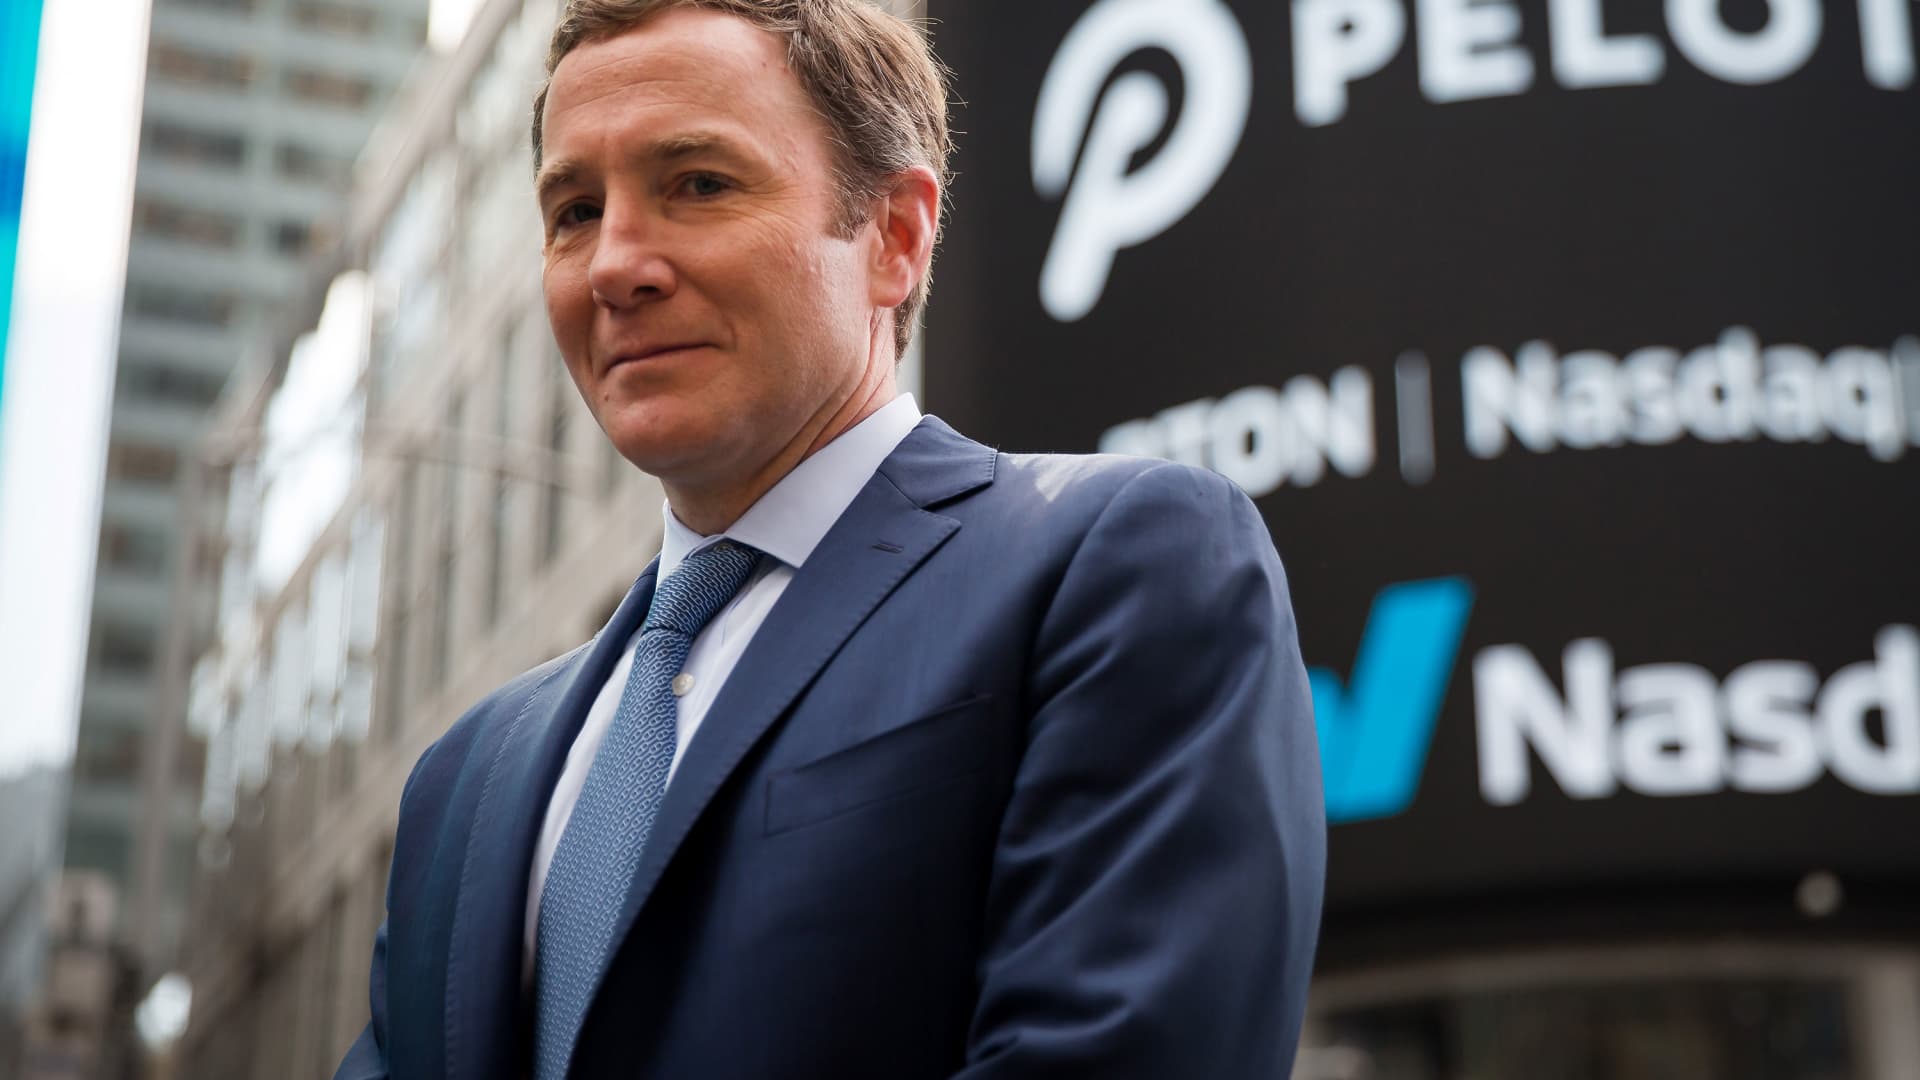 John Foley, co-founder and chief executive officer of Peloton Interactive Inc., stands for a photograph during the company's initial public offering (IPO) in front of the Nasdaq MarketSite in New York, on Thursday, Sept. 26, 2019.